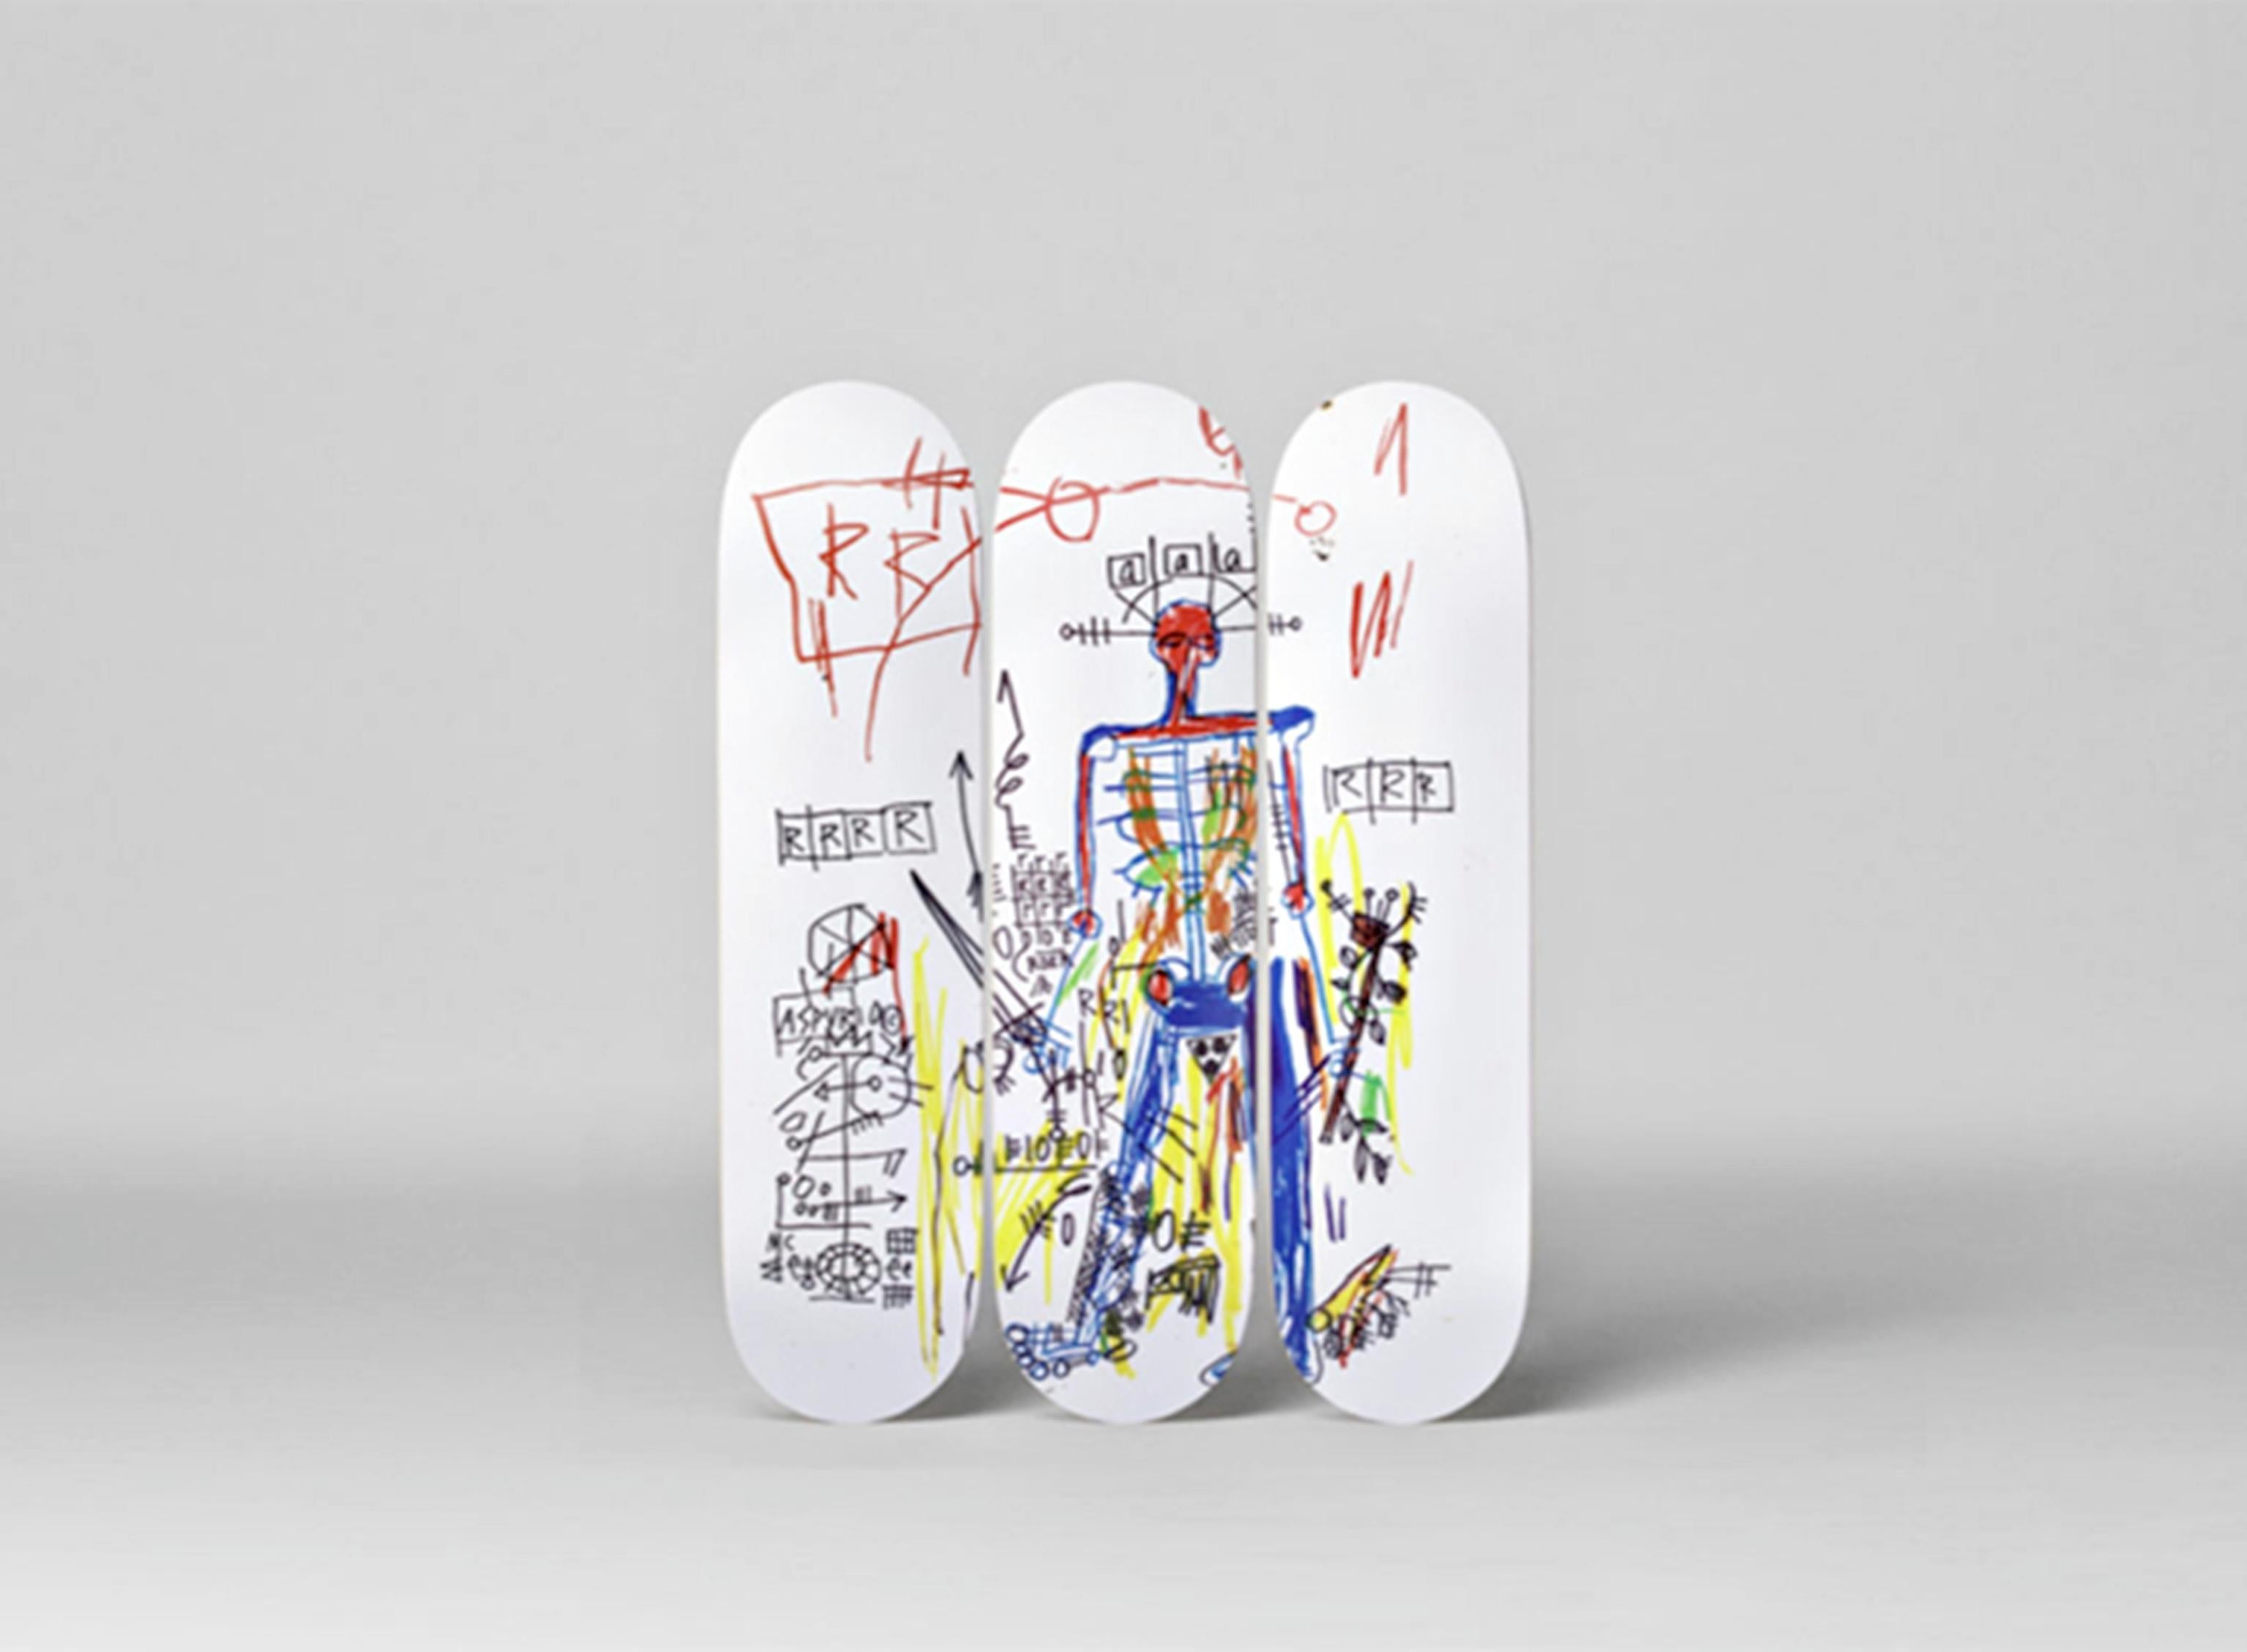 The Skateroom x Estate of Jean-Michel Basquiat
ROBOT Triptych (Set of Three (3) Skateboards), 2017
Set of 3 Silkscreens on 7-Ply Canadian Maplewood Skate Decks (Set of 3)
Estate of Jean-Michel Basquiat copyright and printed signature on the back
31